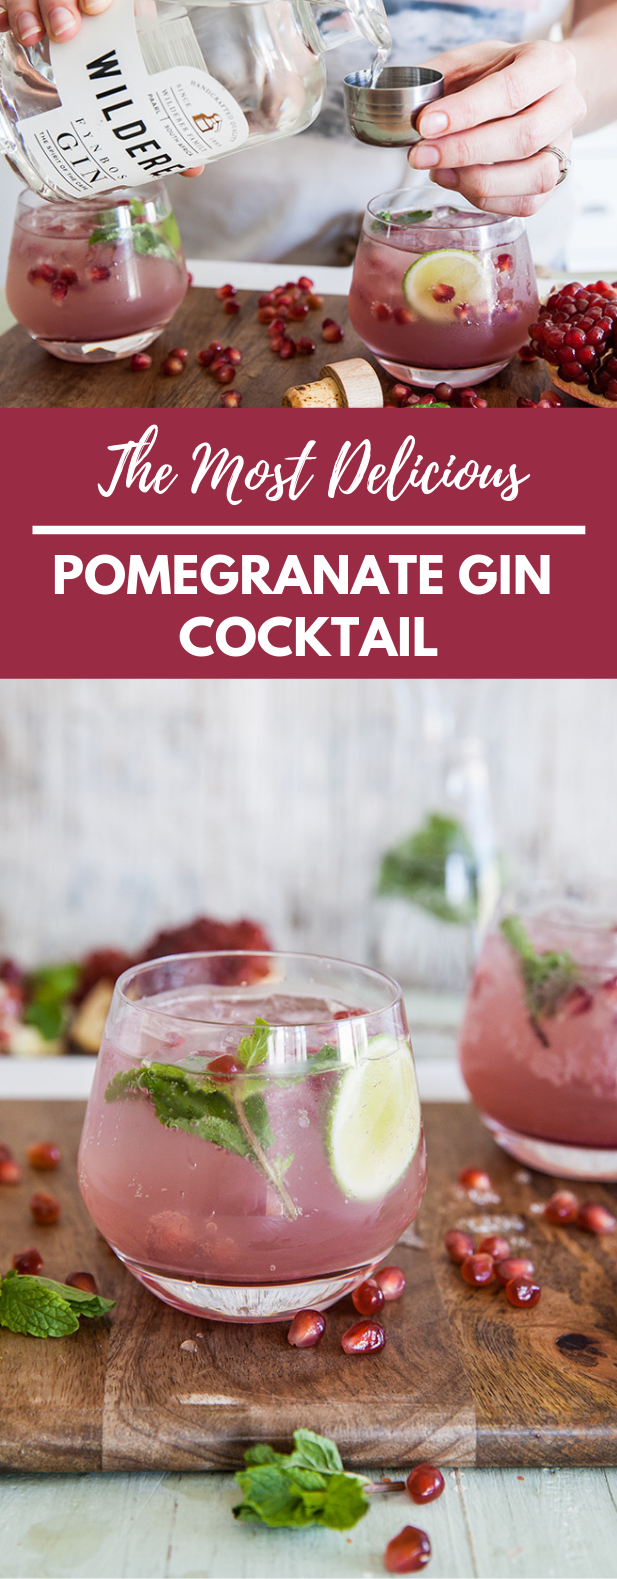 The most delicious pomegranate gin cocktail #vodka #drinks